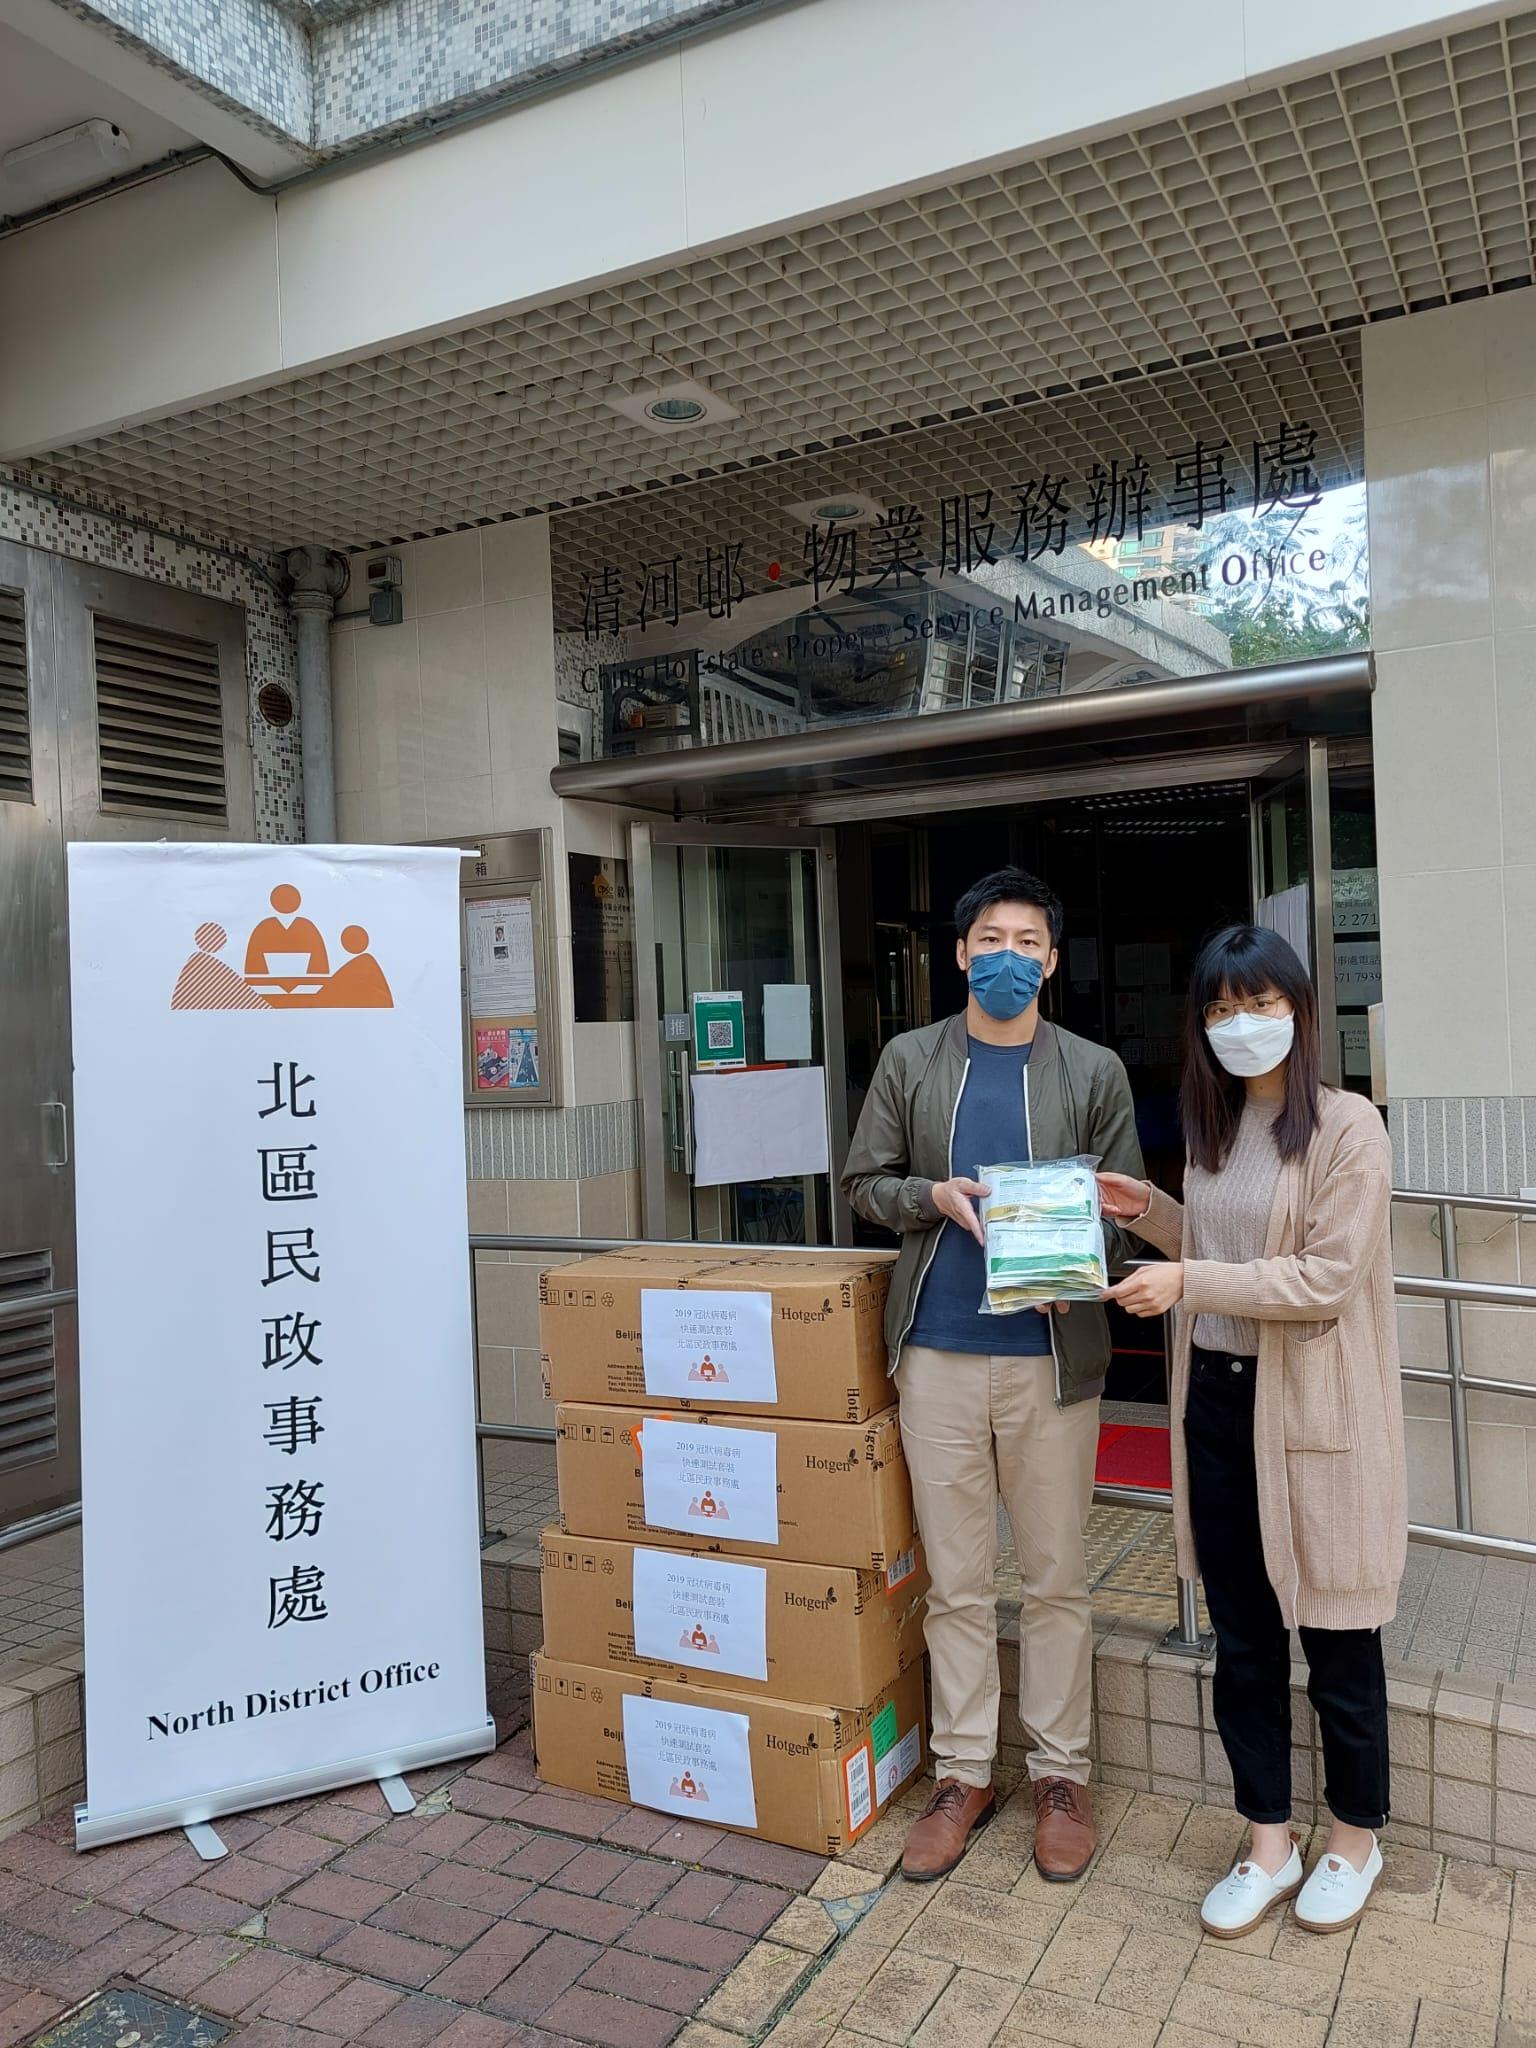 The North District Office today (March 3) distributed COVID-19 rapid test kits to households, cleansing workers and property management staff living and working in Ching Ho Estate, Sheung Shui, for voluntary testing through the Property Service Management Office of the Housing Department.